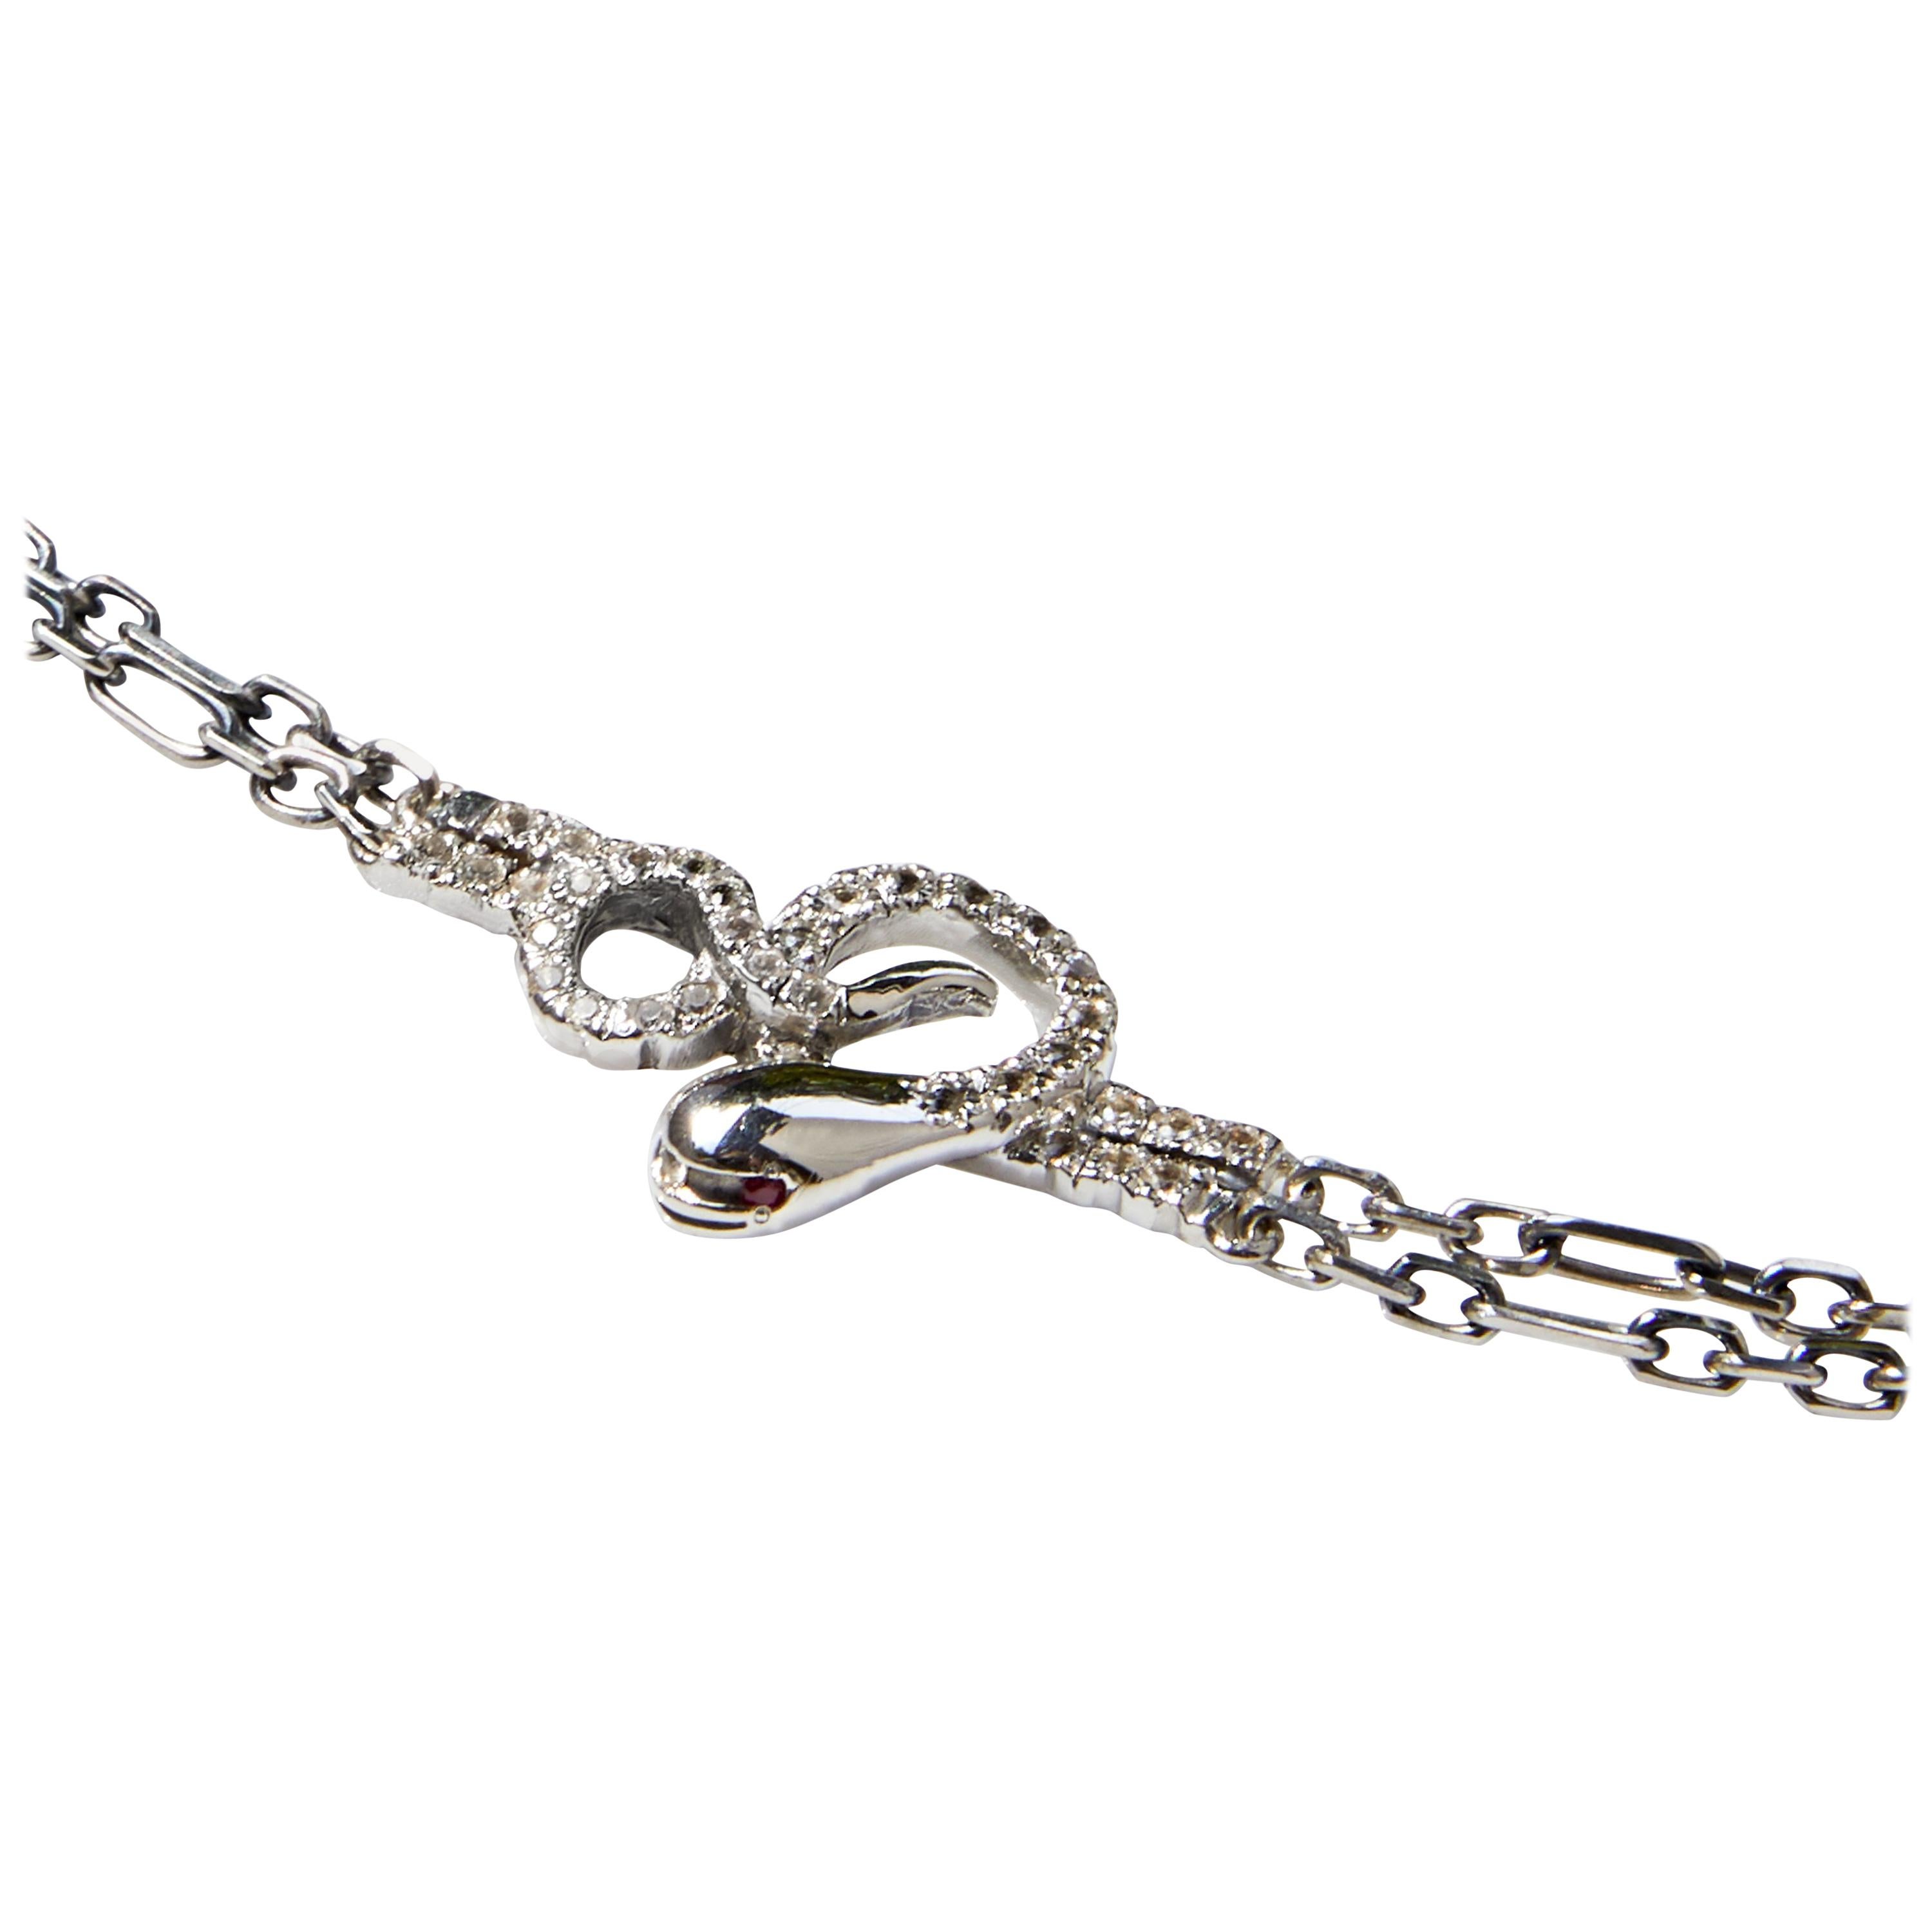 White Sapphire Ruby Eyes Snake Necklace Choker Chain Silver Victorian Style J Dauphin 17,5 inches long

J Dauphin 'Internal selves